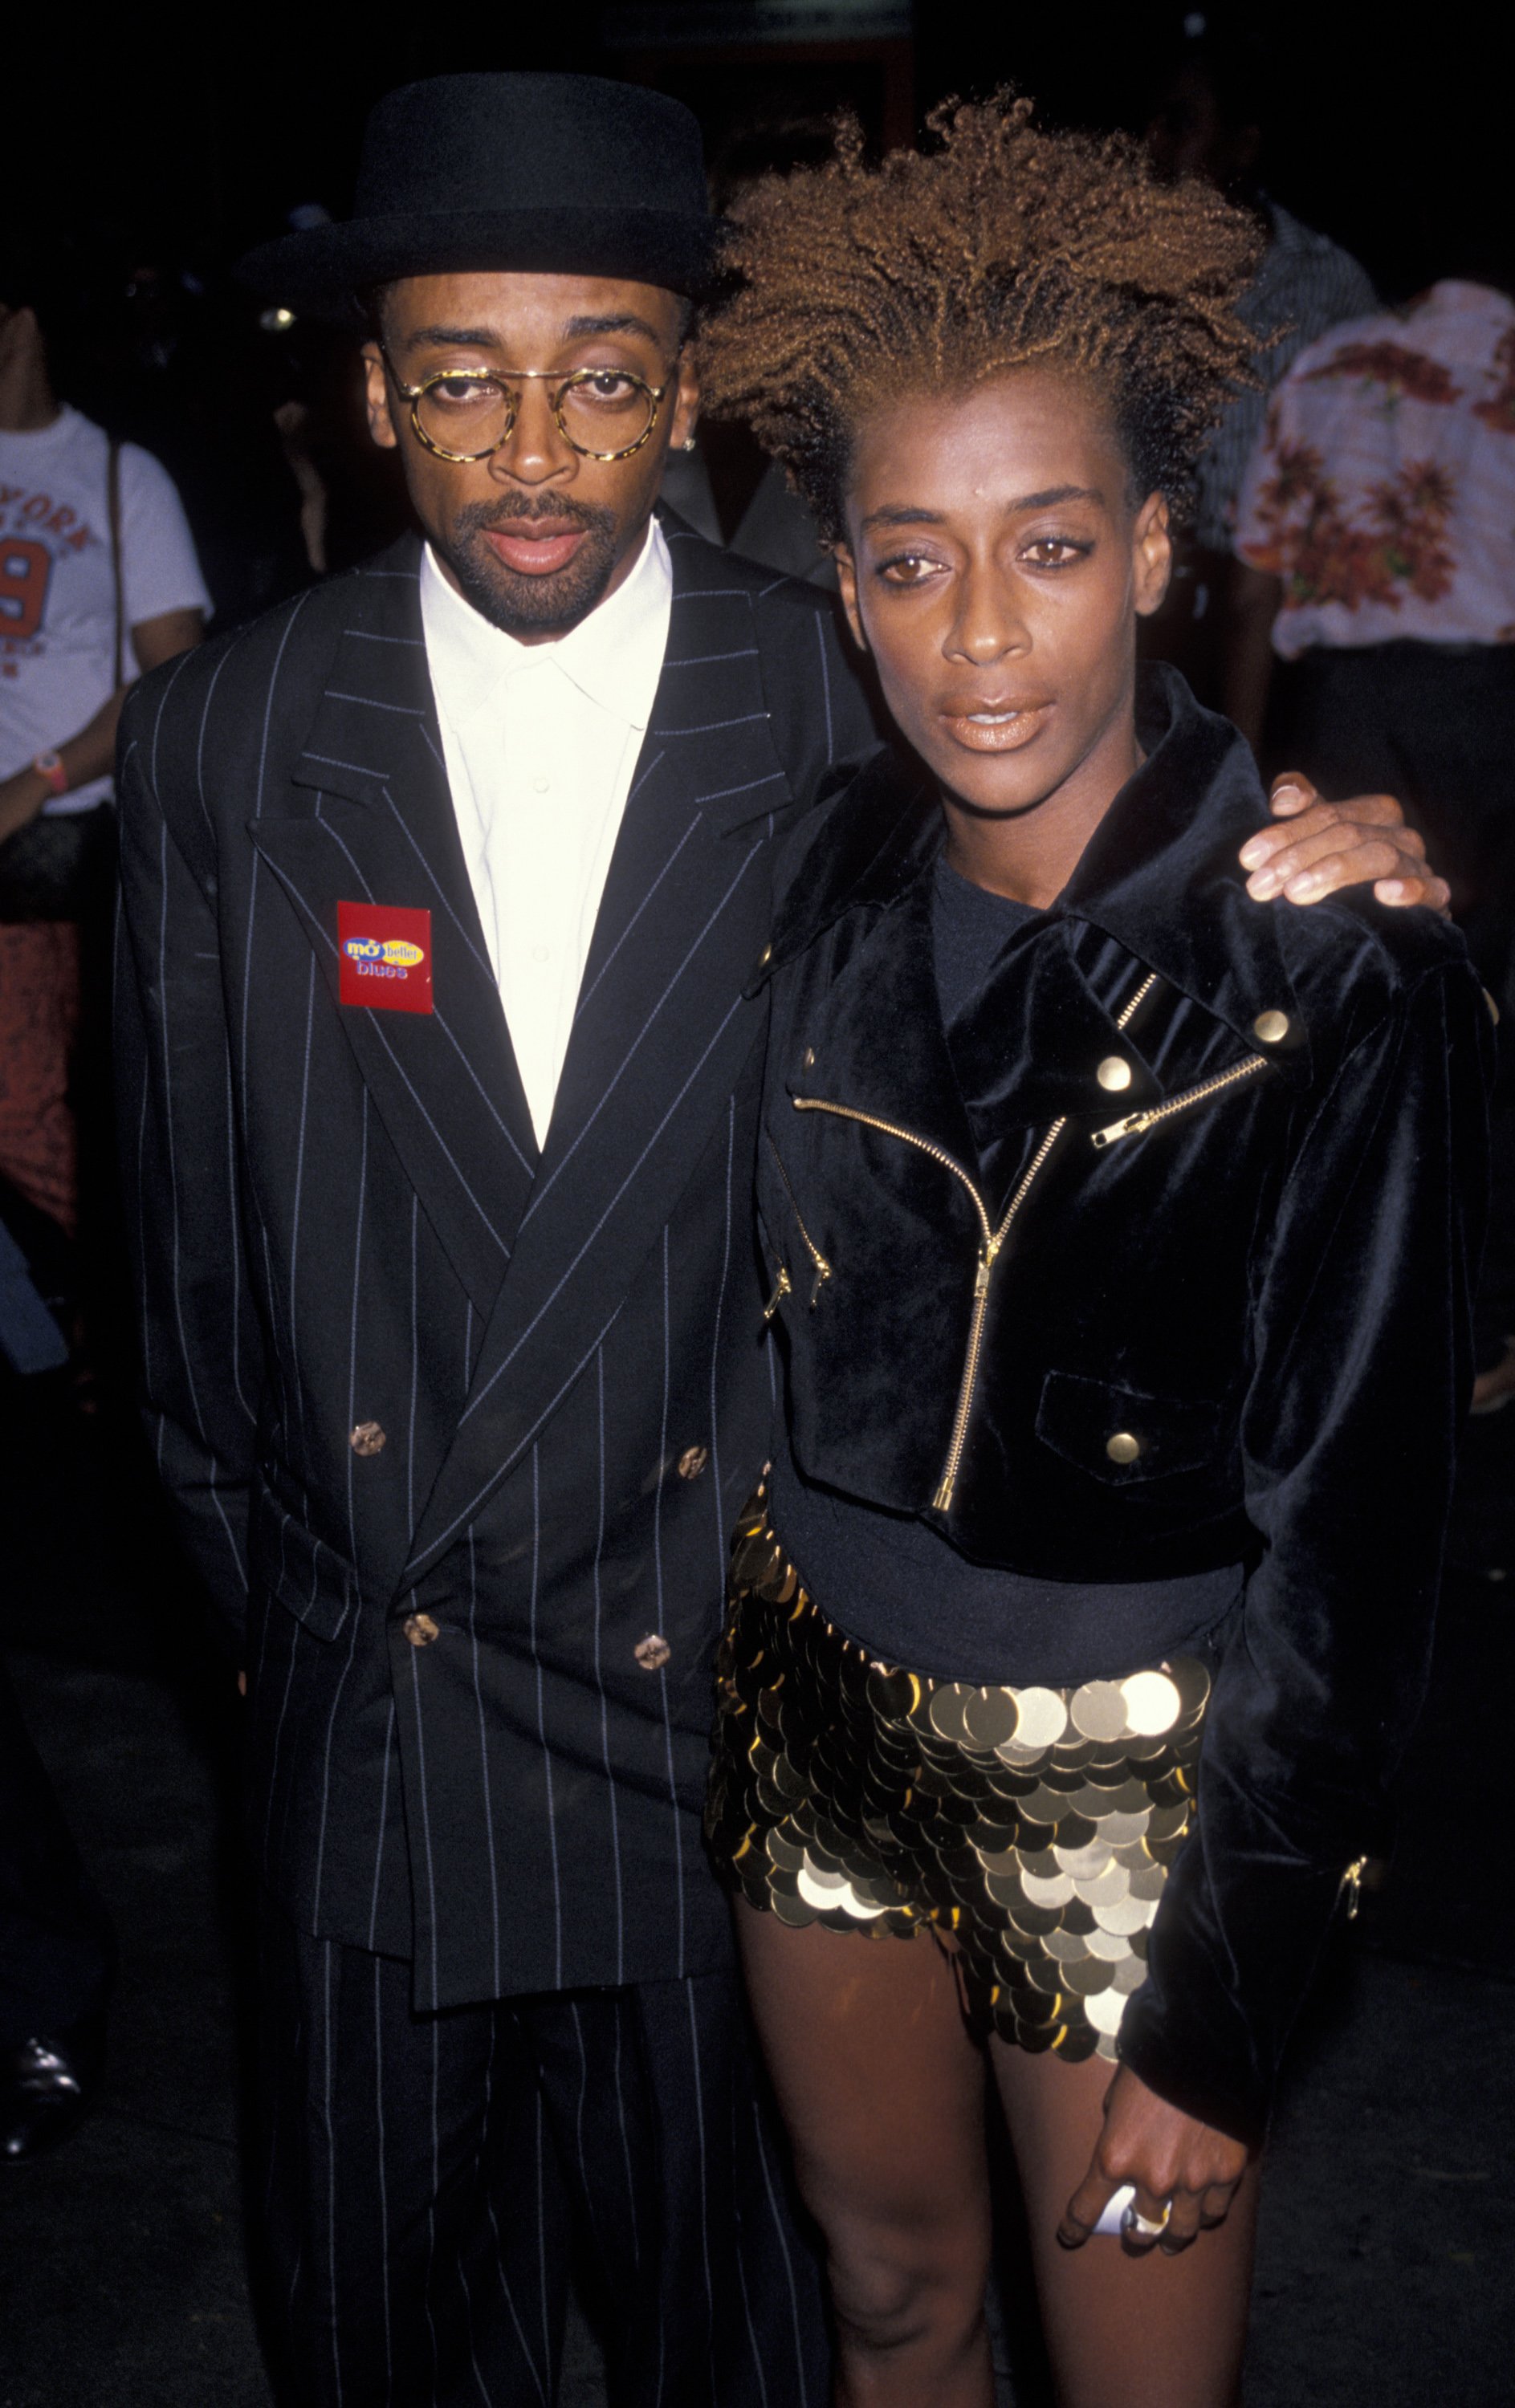 Spike Lee and his sister Joie Lee are photographed the premiere of 'Mo' Better Blues' on July 23, 1990 at the Ziegfeld Theater in New York City | Source: Getty Images